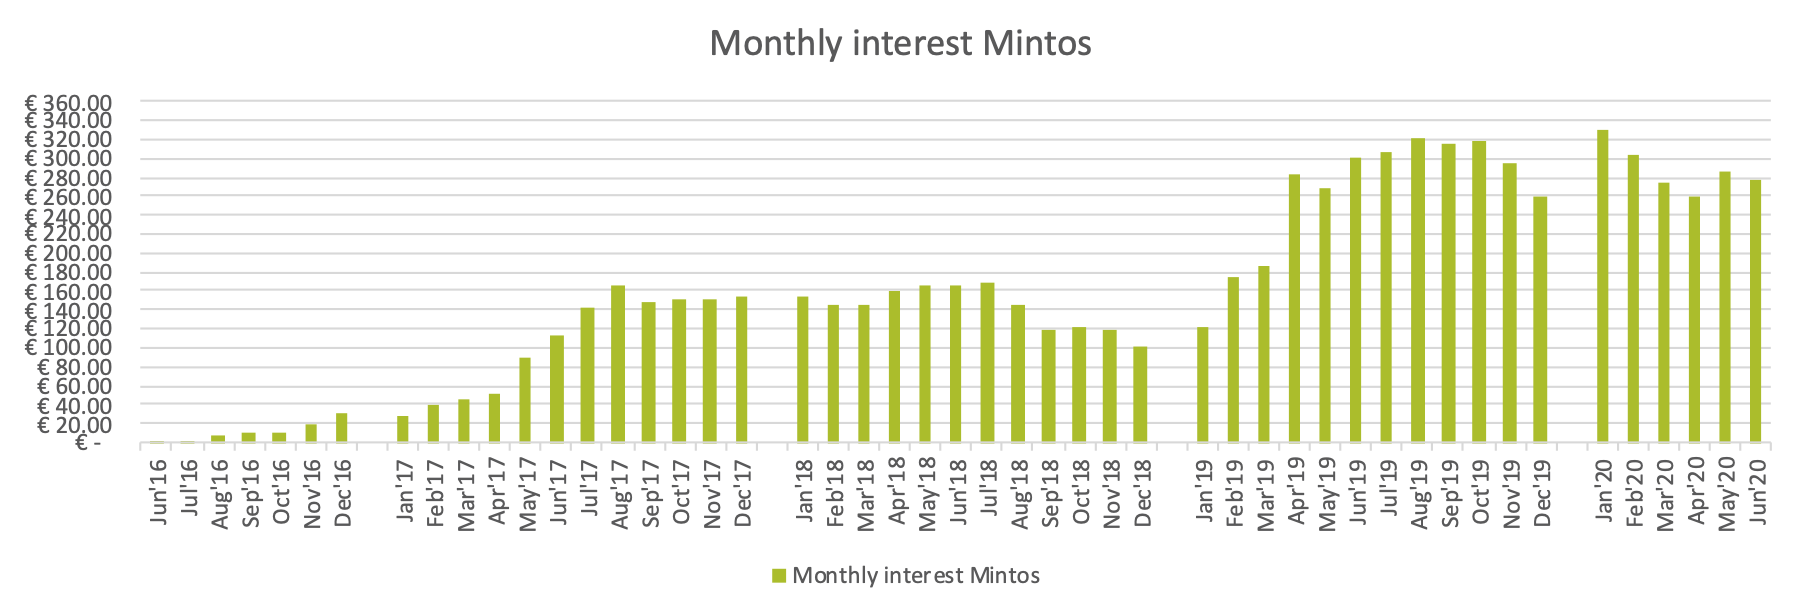 My monthly interest income from Mintos.